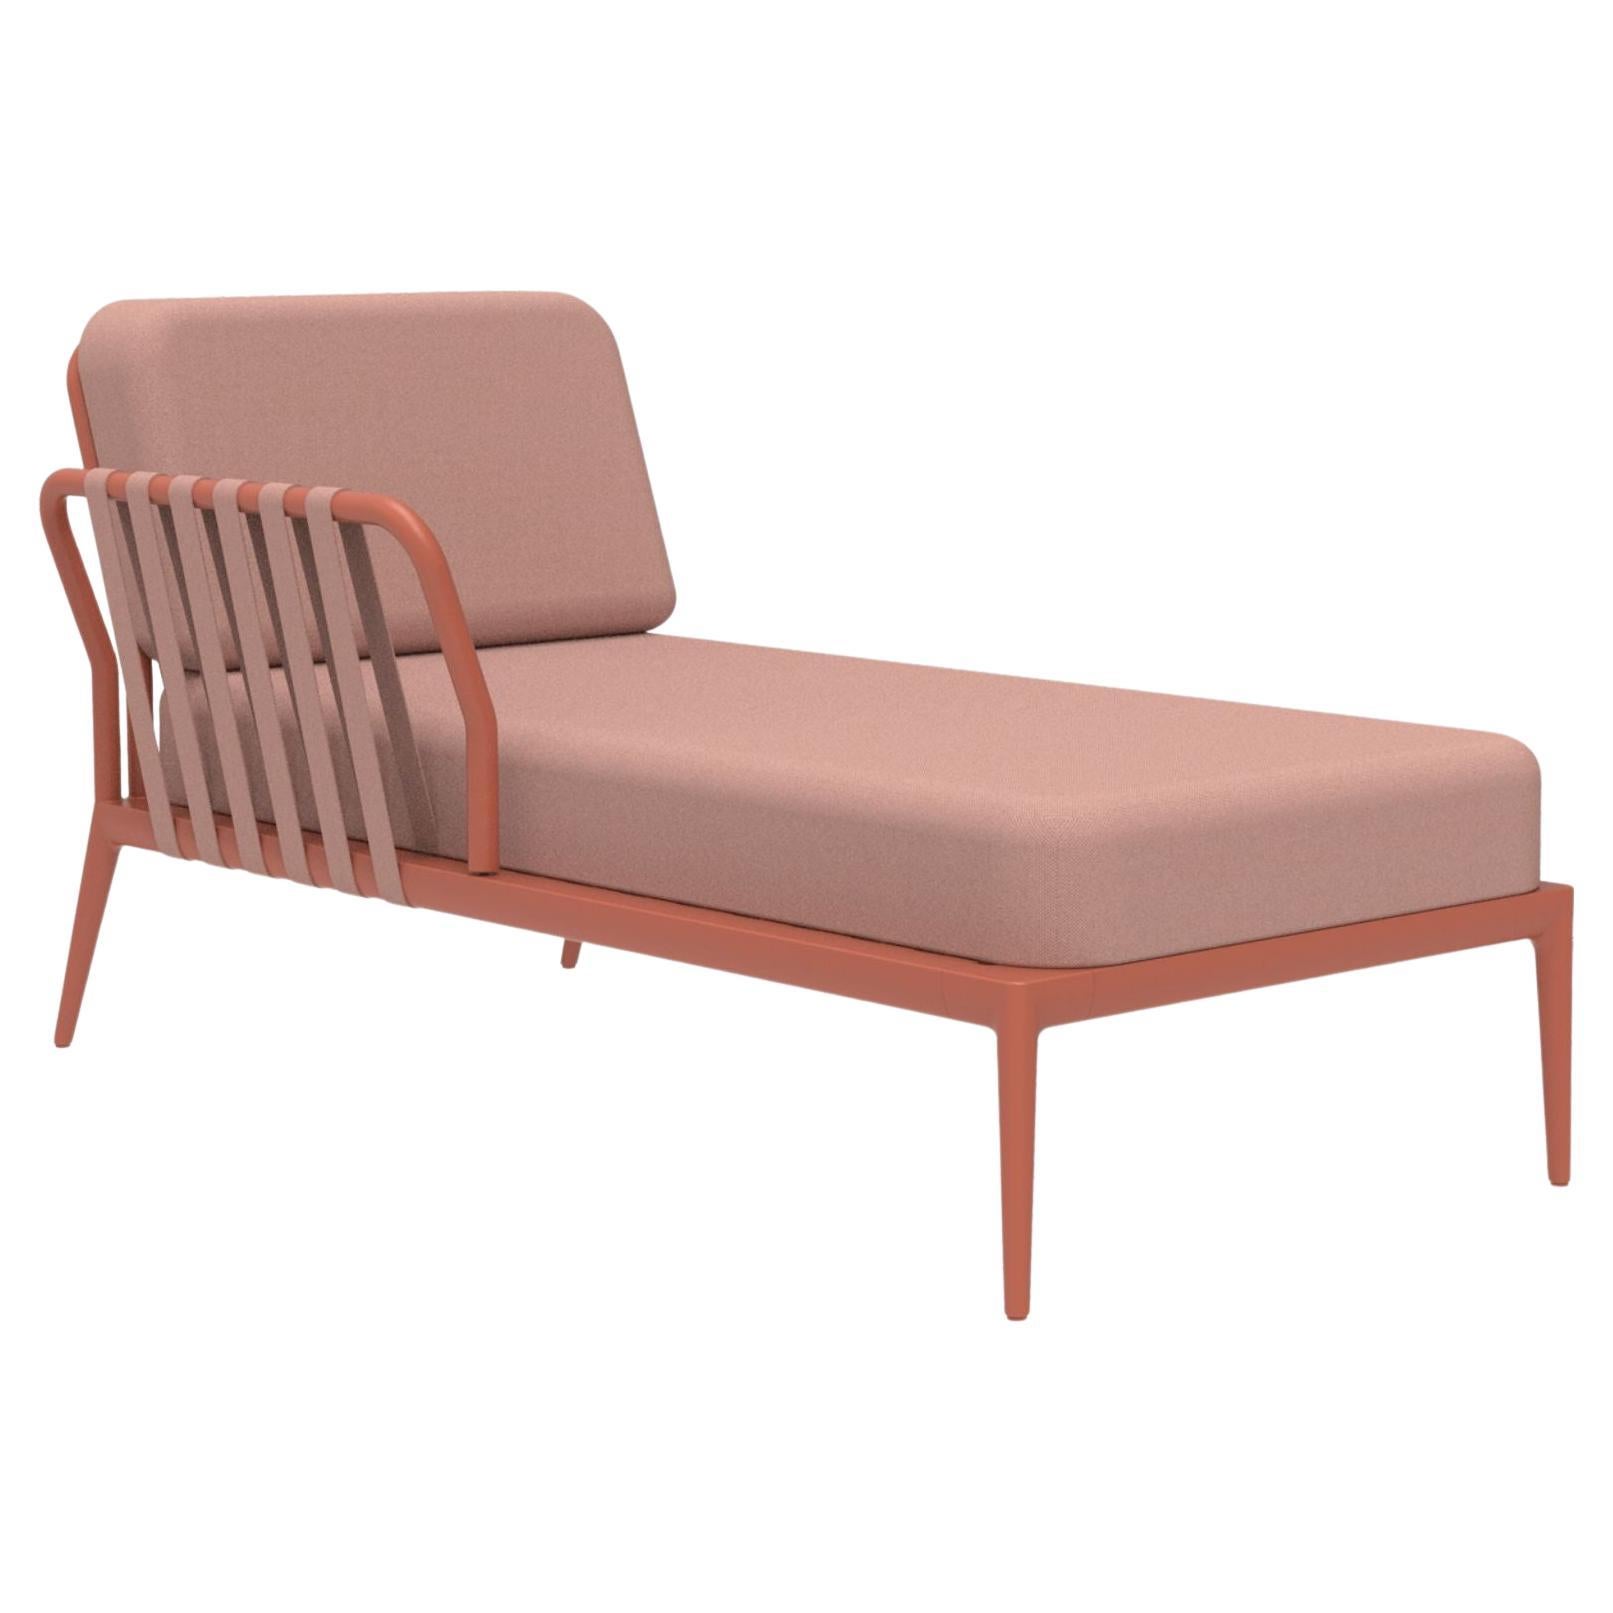 Ribbons Salmon Right Chaise Lounge by Mowee For Sale